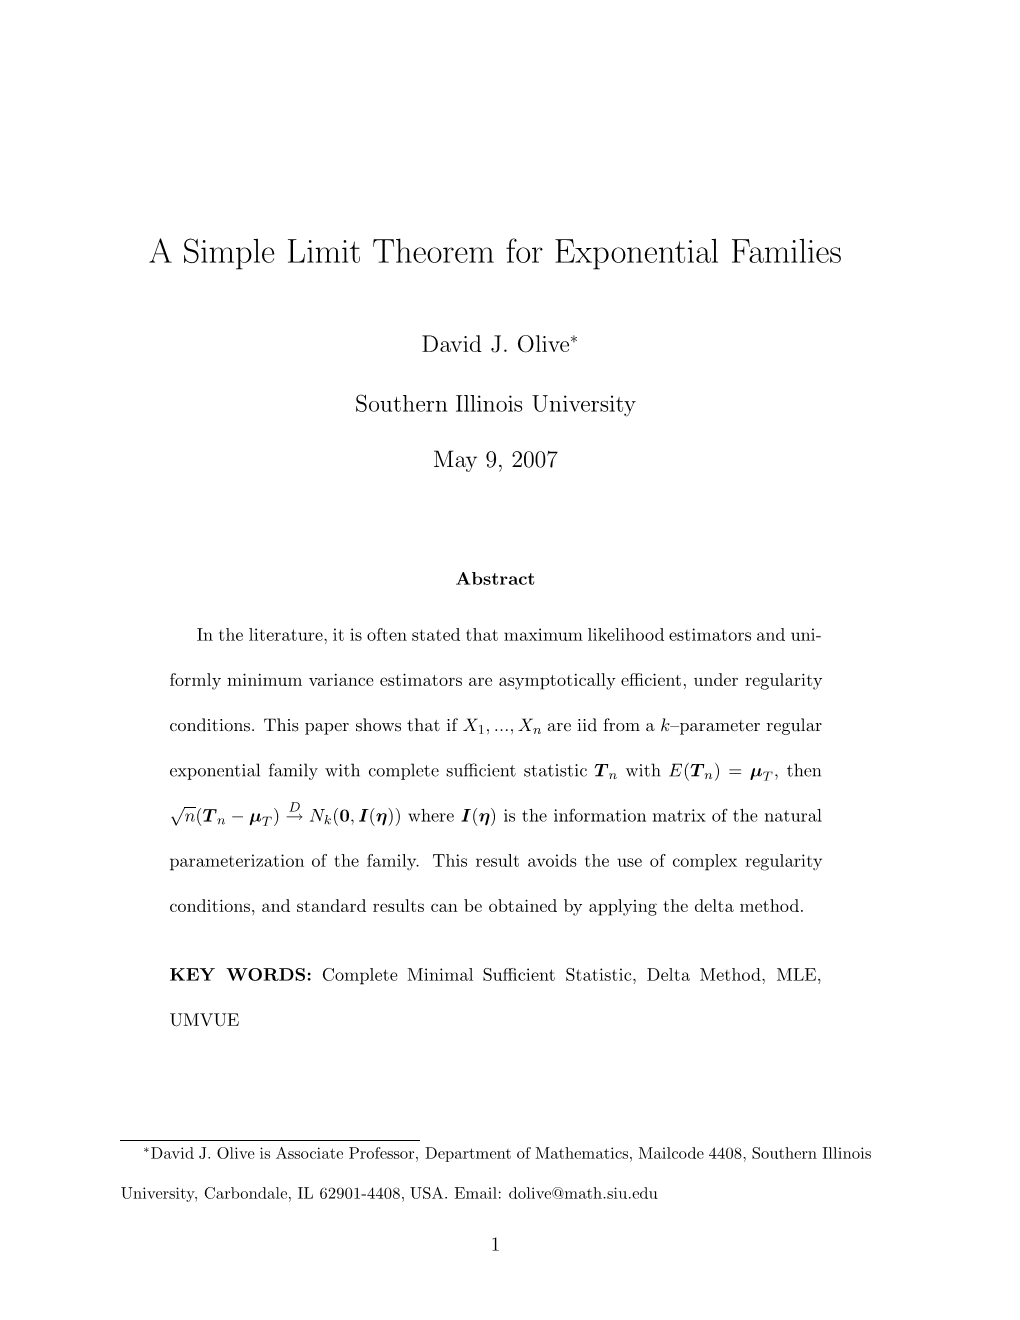 A Simple Limit Theorem for Exponential Families